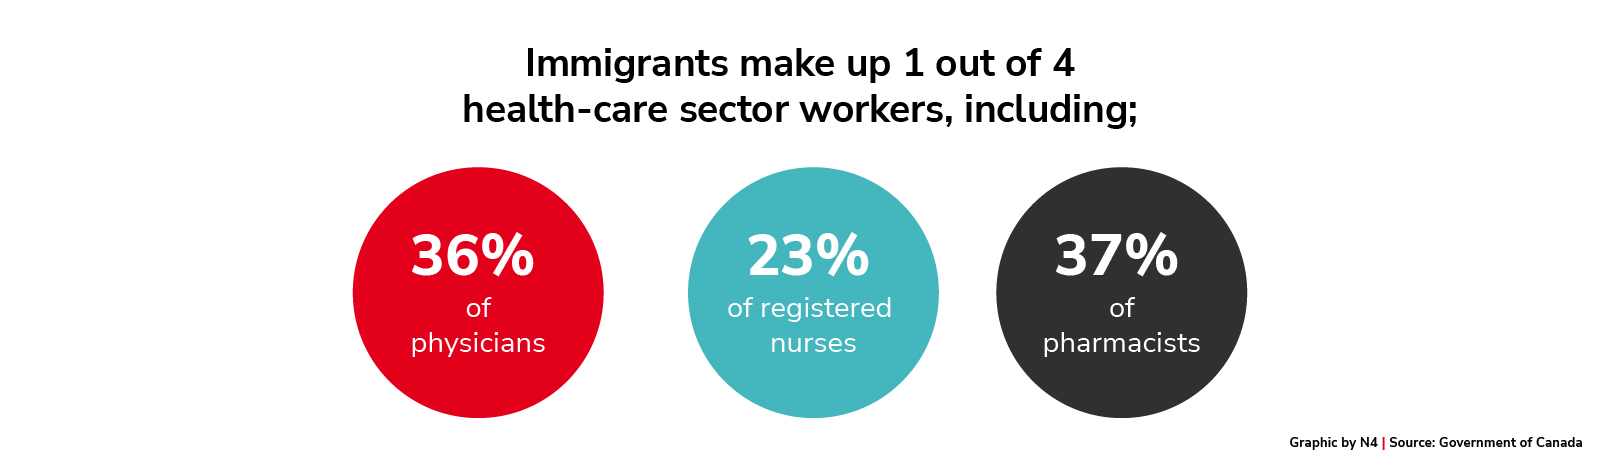 Percentage of health care employees who are immigrants to Canada